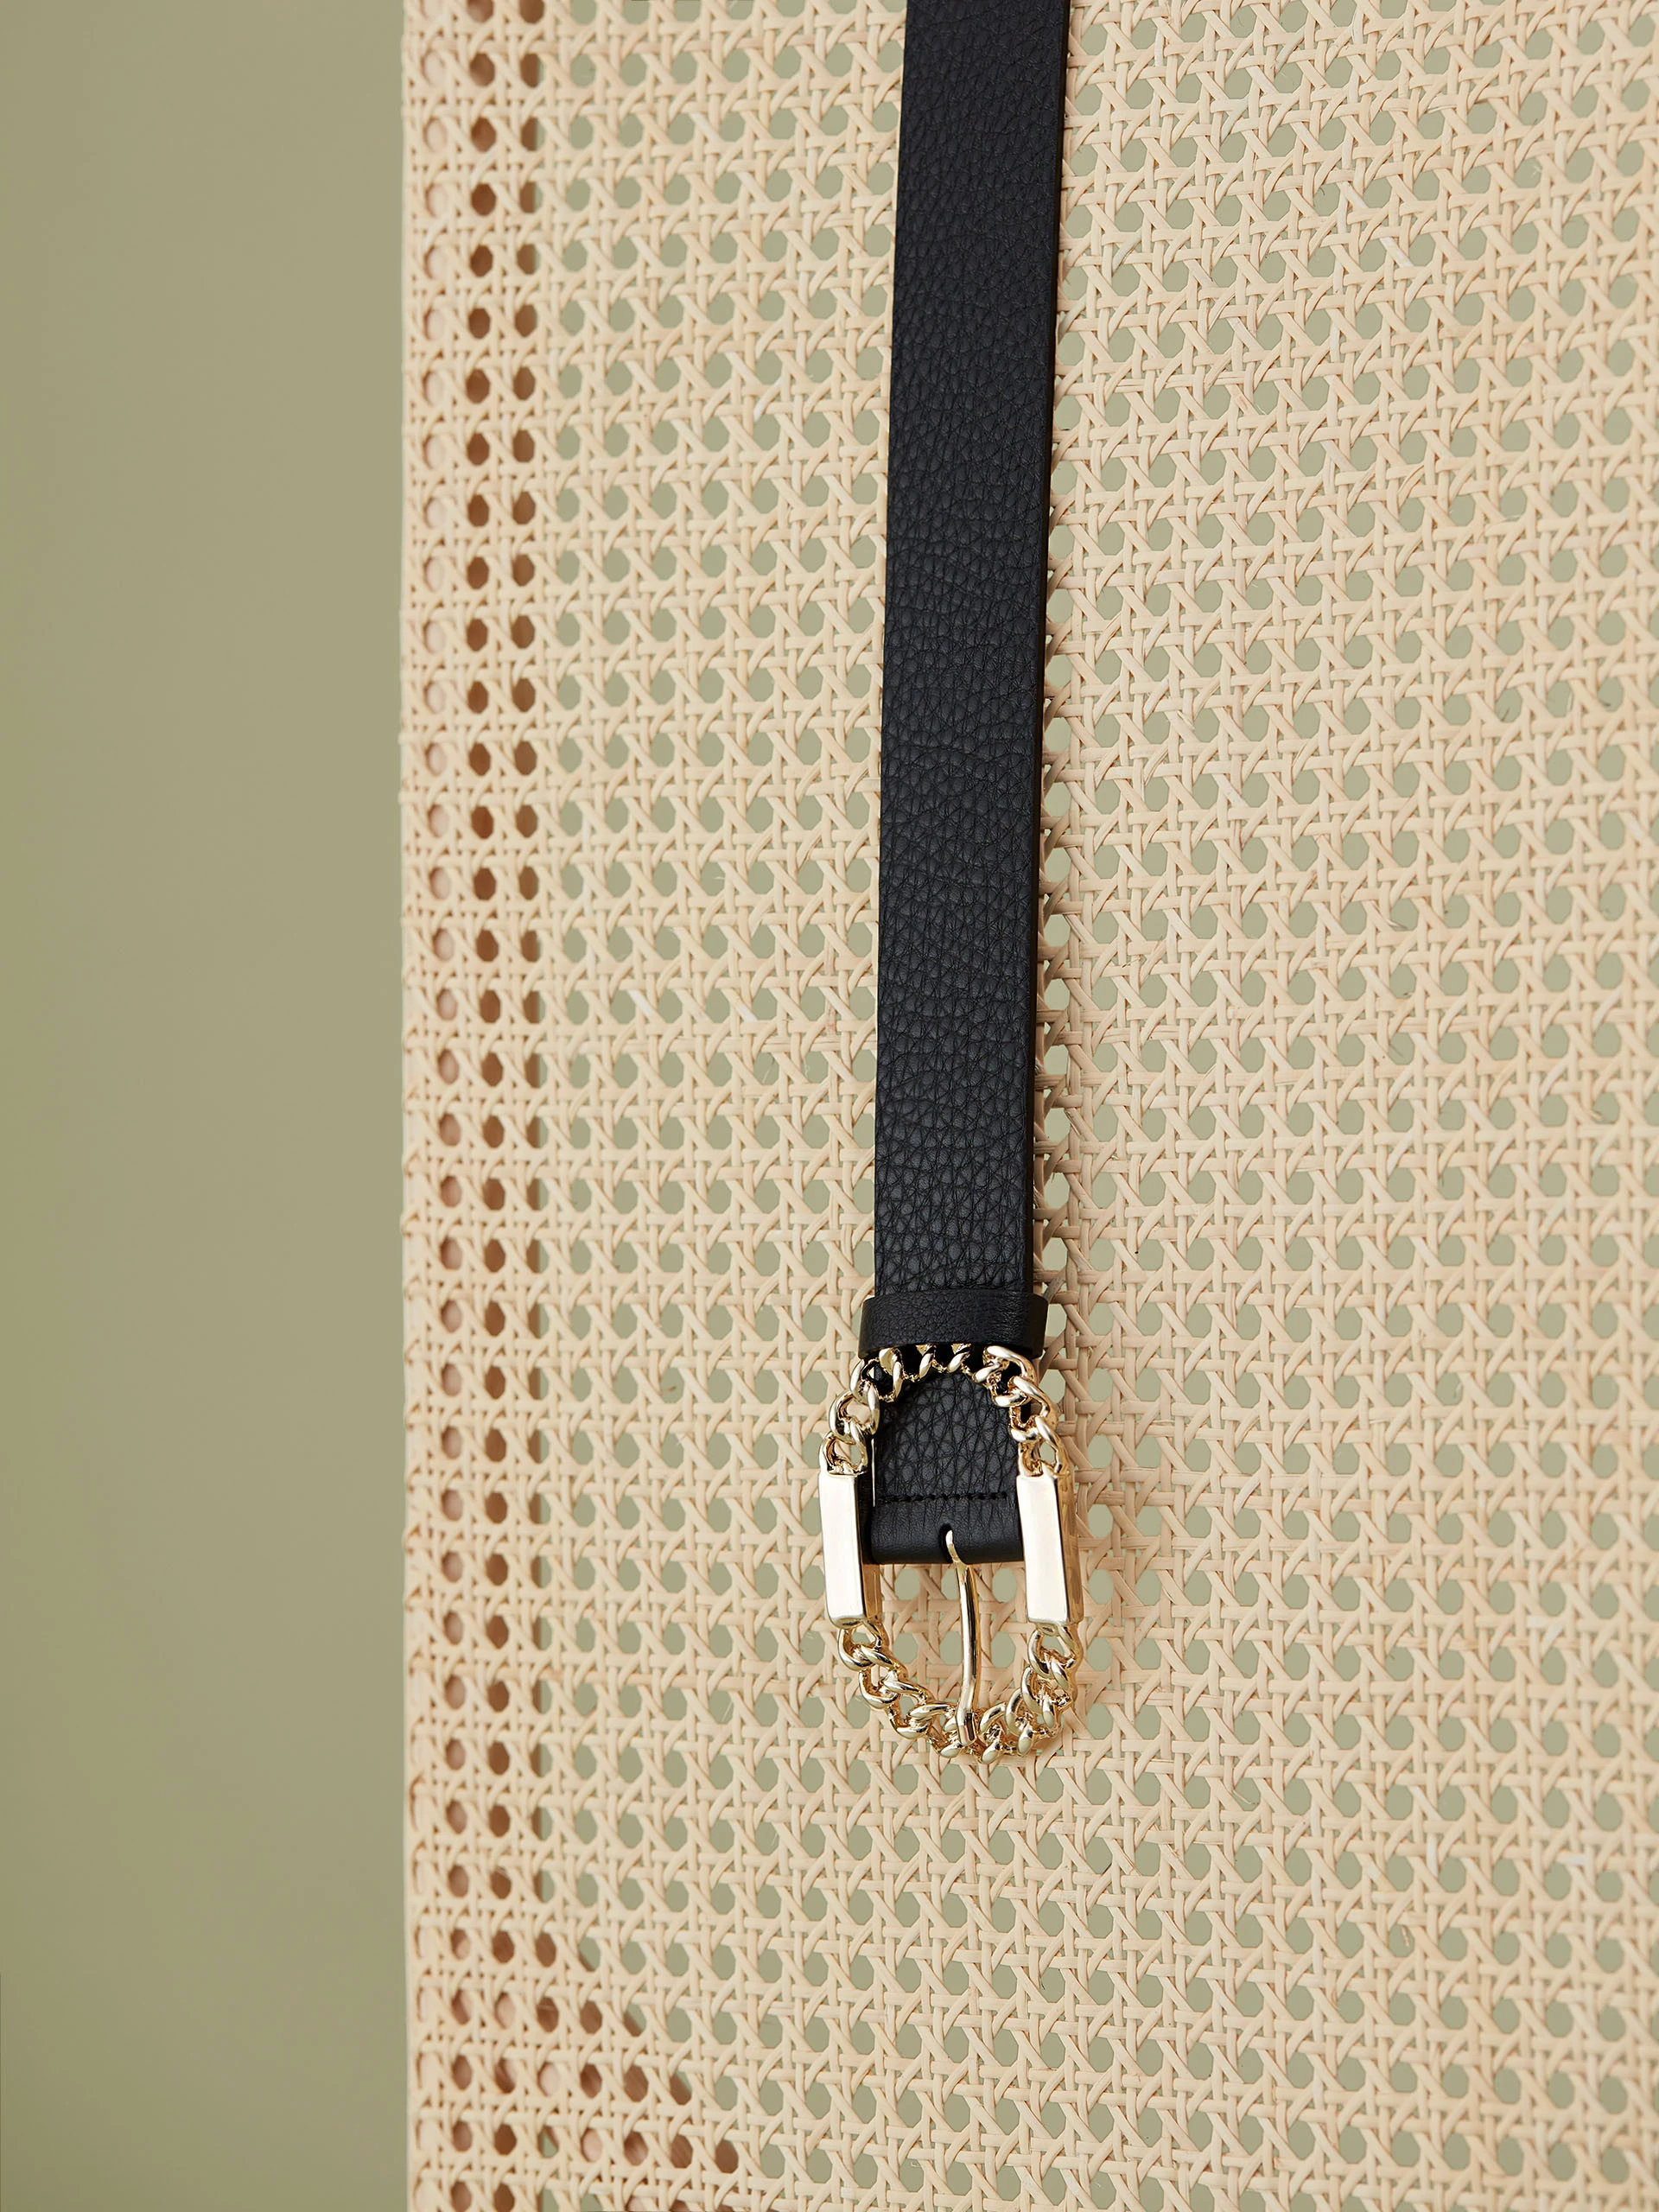 BELT WITH DECORATIVE BUCKLE